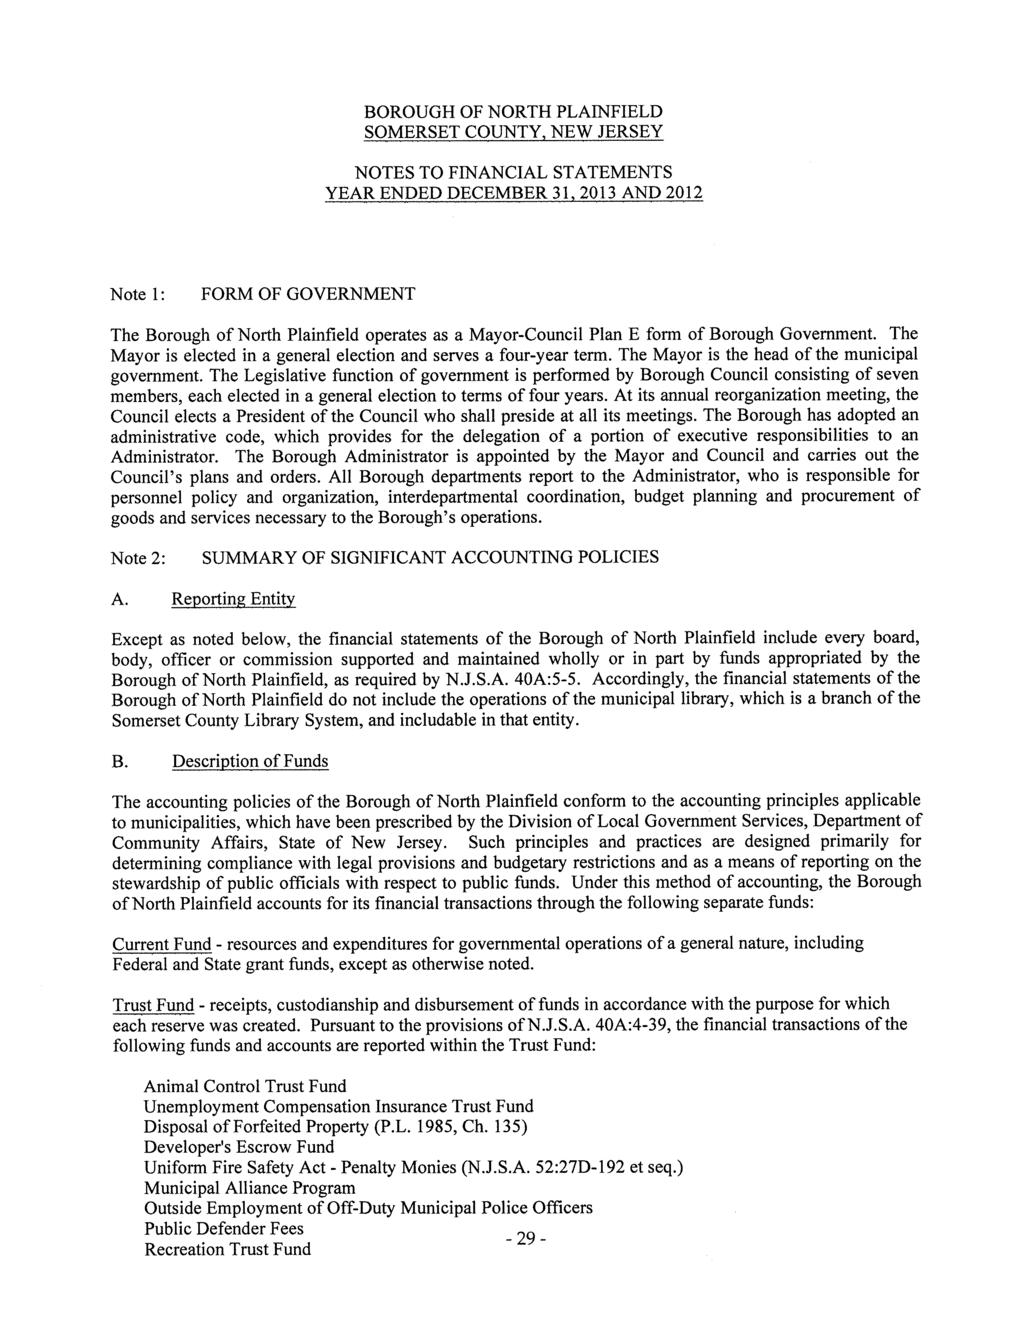 BOROUGH SOMERSET OF NORTH PLAINFIELD COUNTY, NEW JERSEY NOTES TO FINANCIAL STATEMENTS YEAR ENDED DECEMBER 31, 2013 AND 2012 Note 1: FORM OF GOVERNMENT The Borough of North Plainfield operates as a